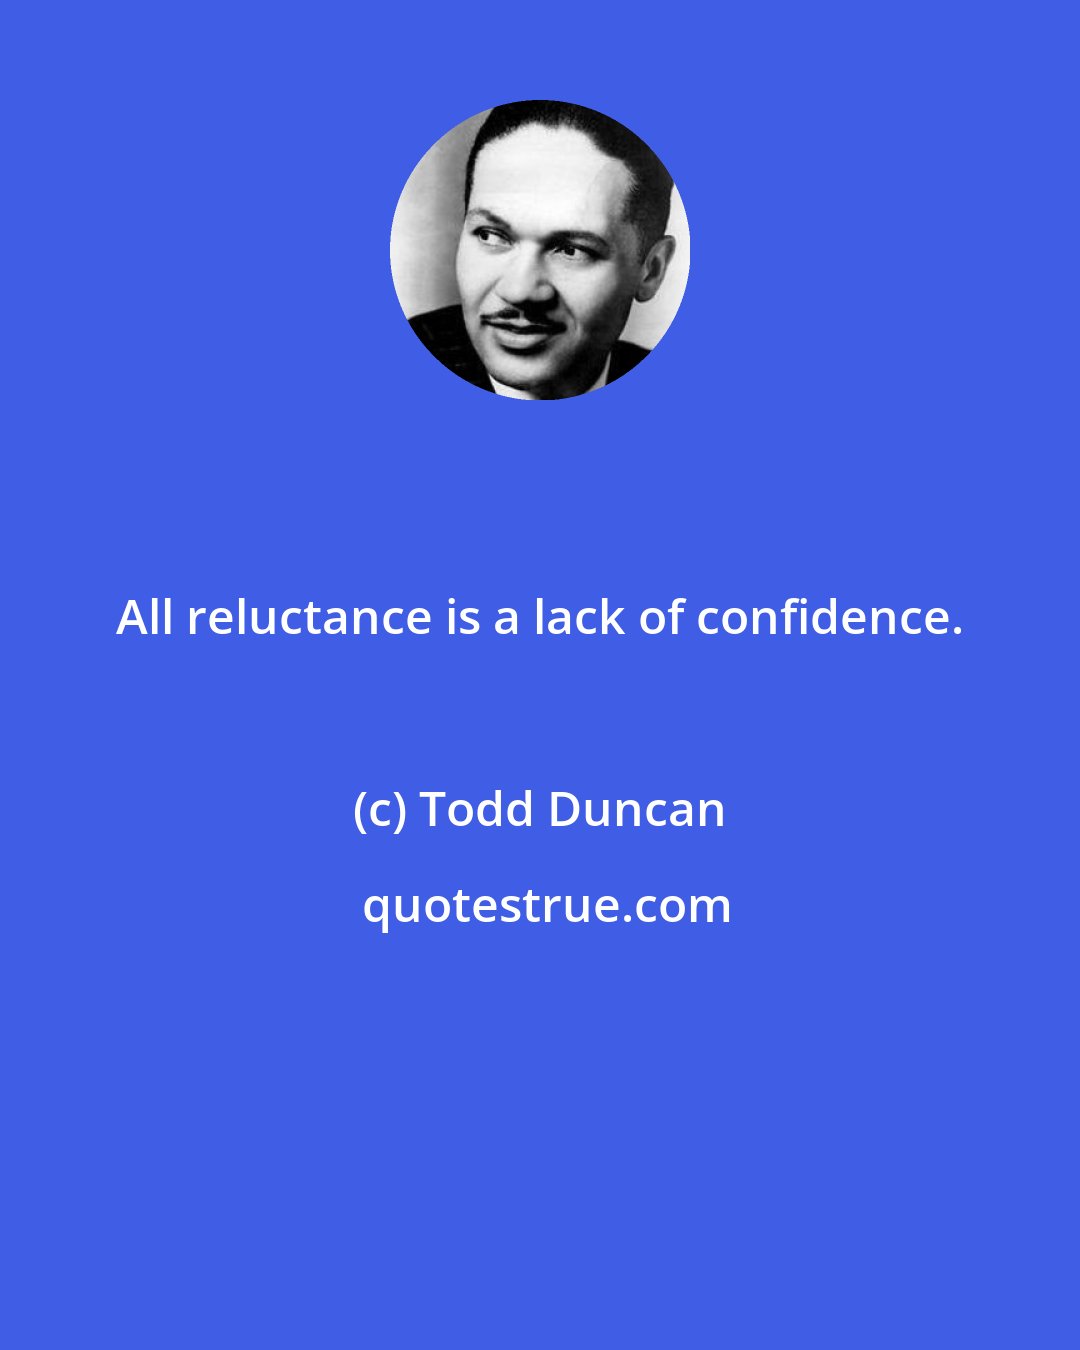 Todd Duncan: All reluctance is a lack of confidence.